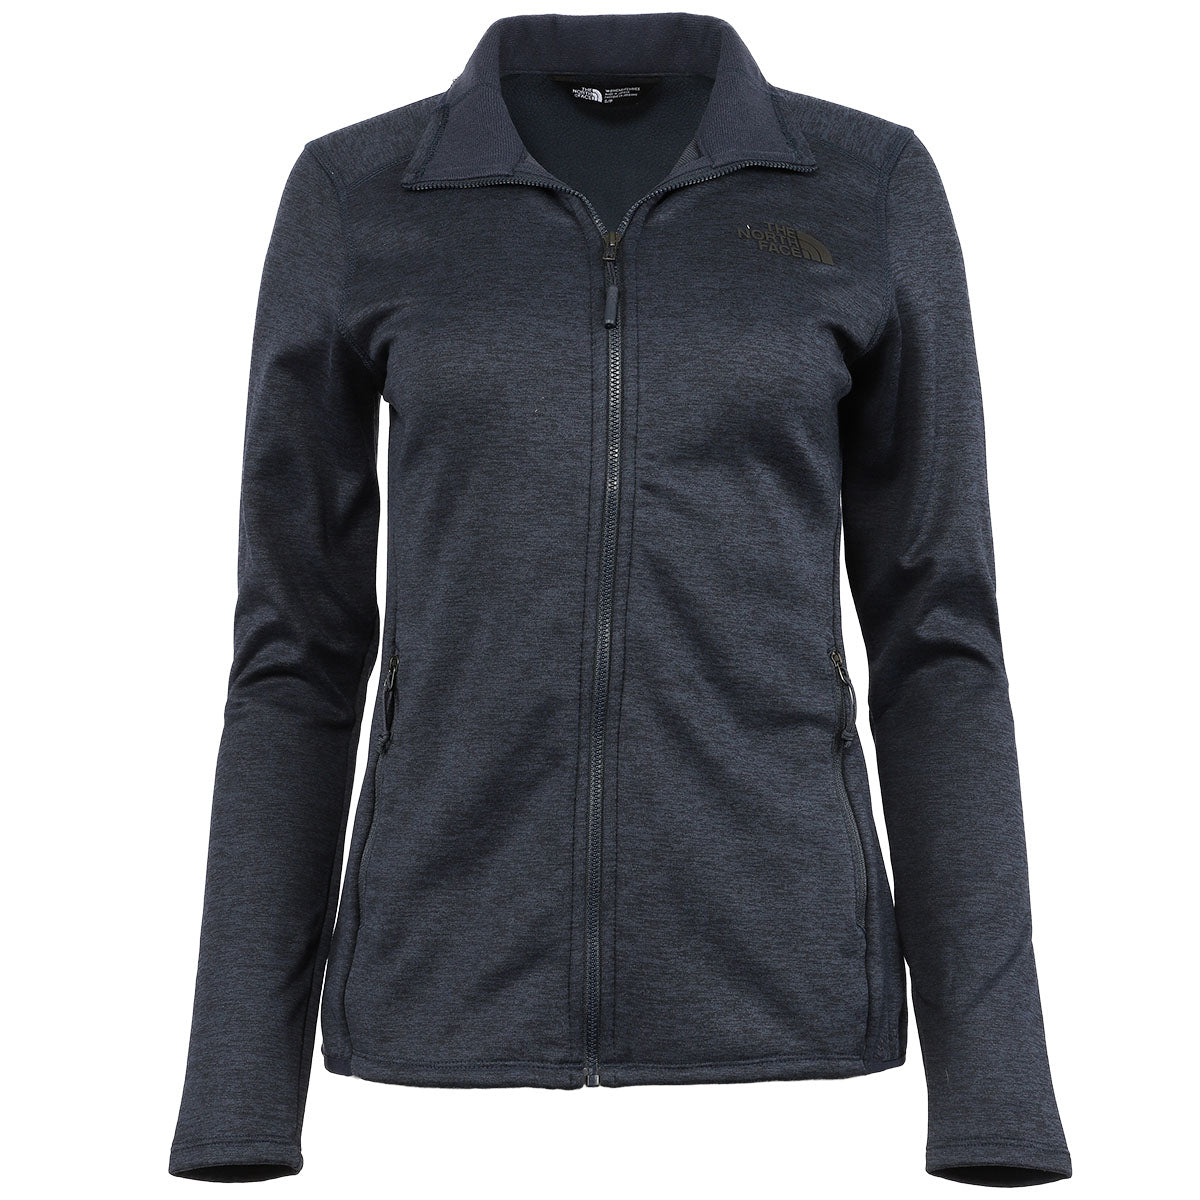 Image of The North Face Women's Skyline Full-Zip Super Soft Jacket